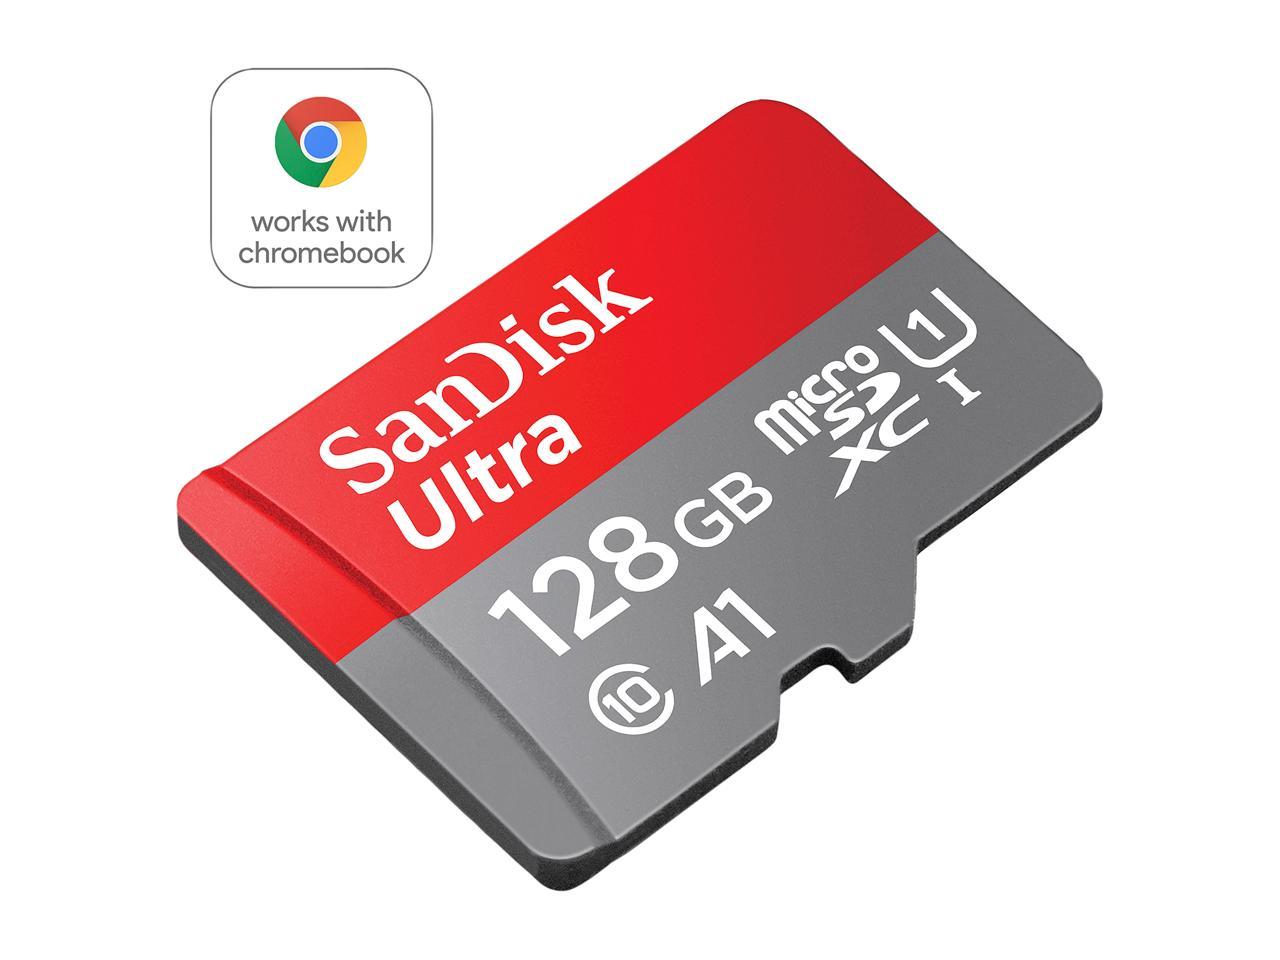 100MBs A1 U1 C10 Works with SanDisk SanDisk Ultra 128GB MicroSDXC Verified for ZTE Max by SanFlash